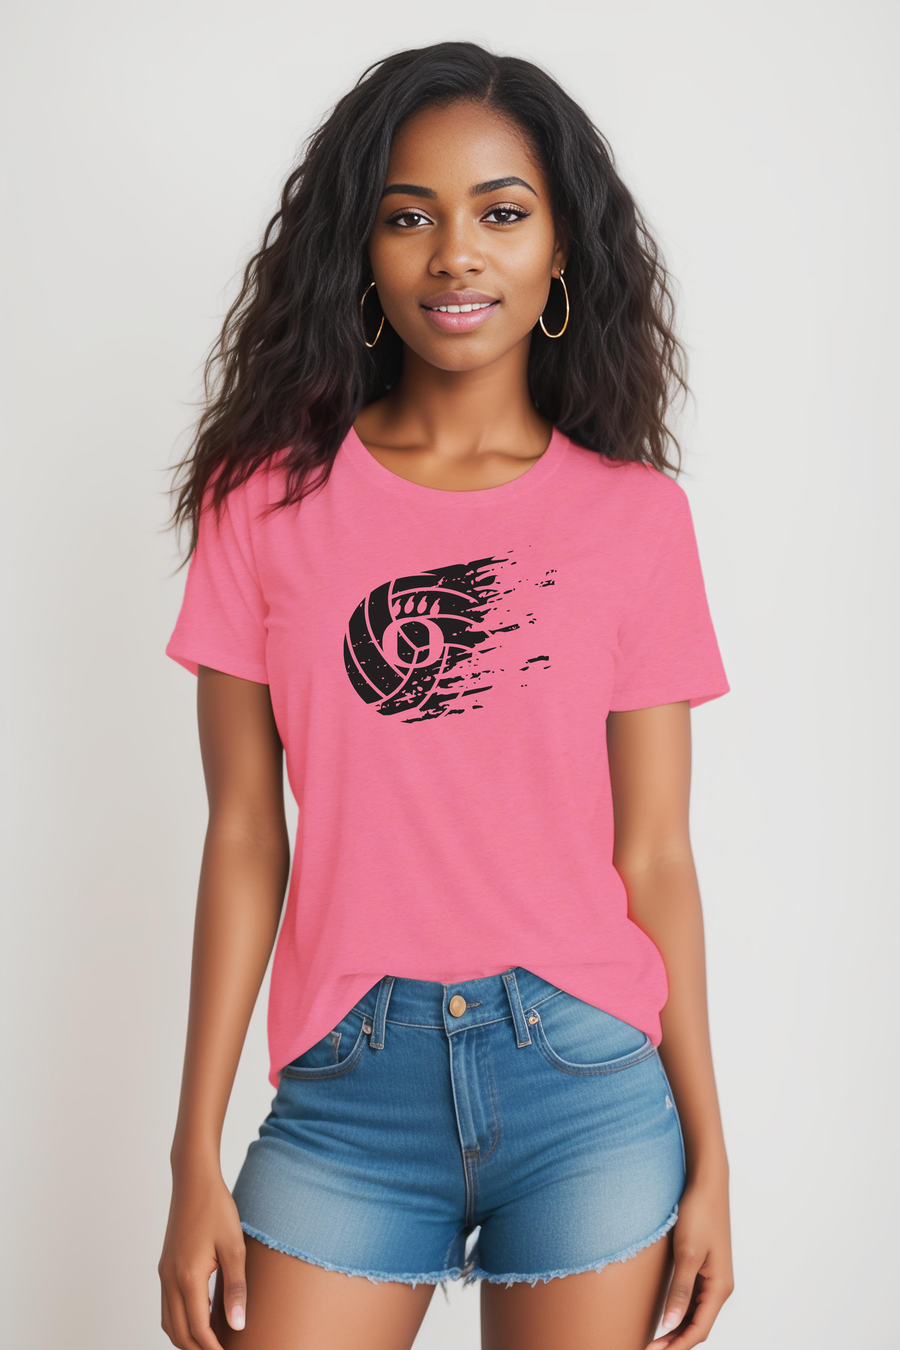 Dig Pink - OHS Volleyball- Faded Volleyball Design- Charity Pink Unisex Shirt(OHS)